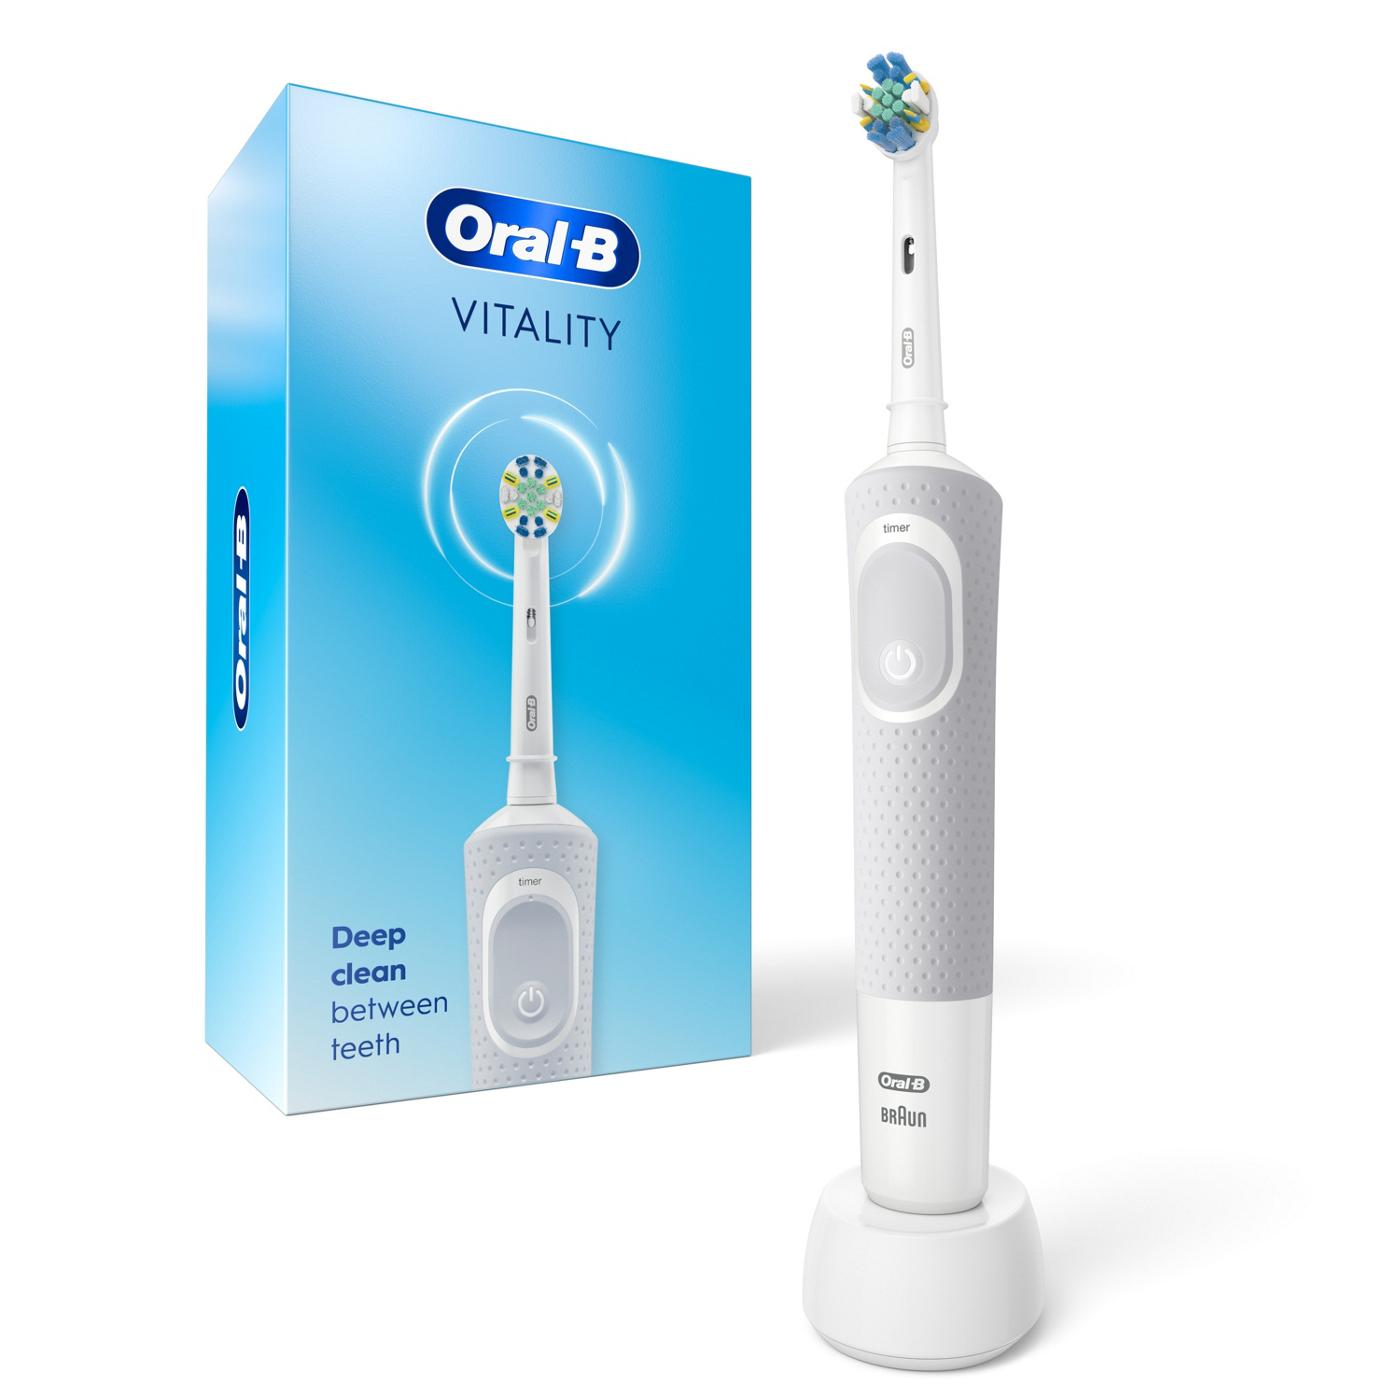 Oral-B Vitality Rechargeable Toothbrush; image 6 of 7